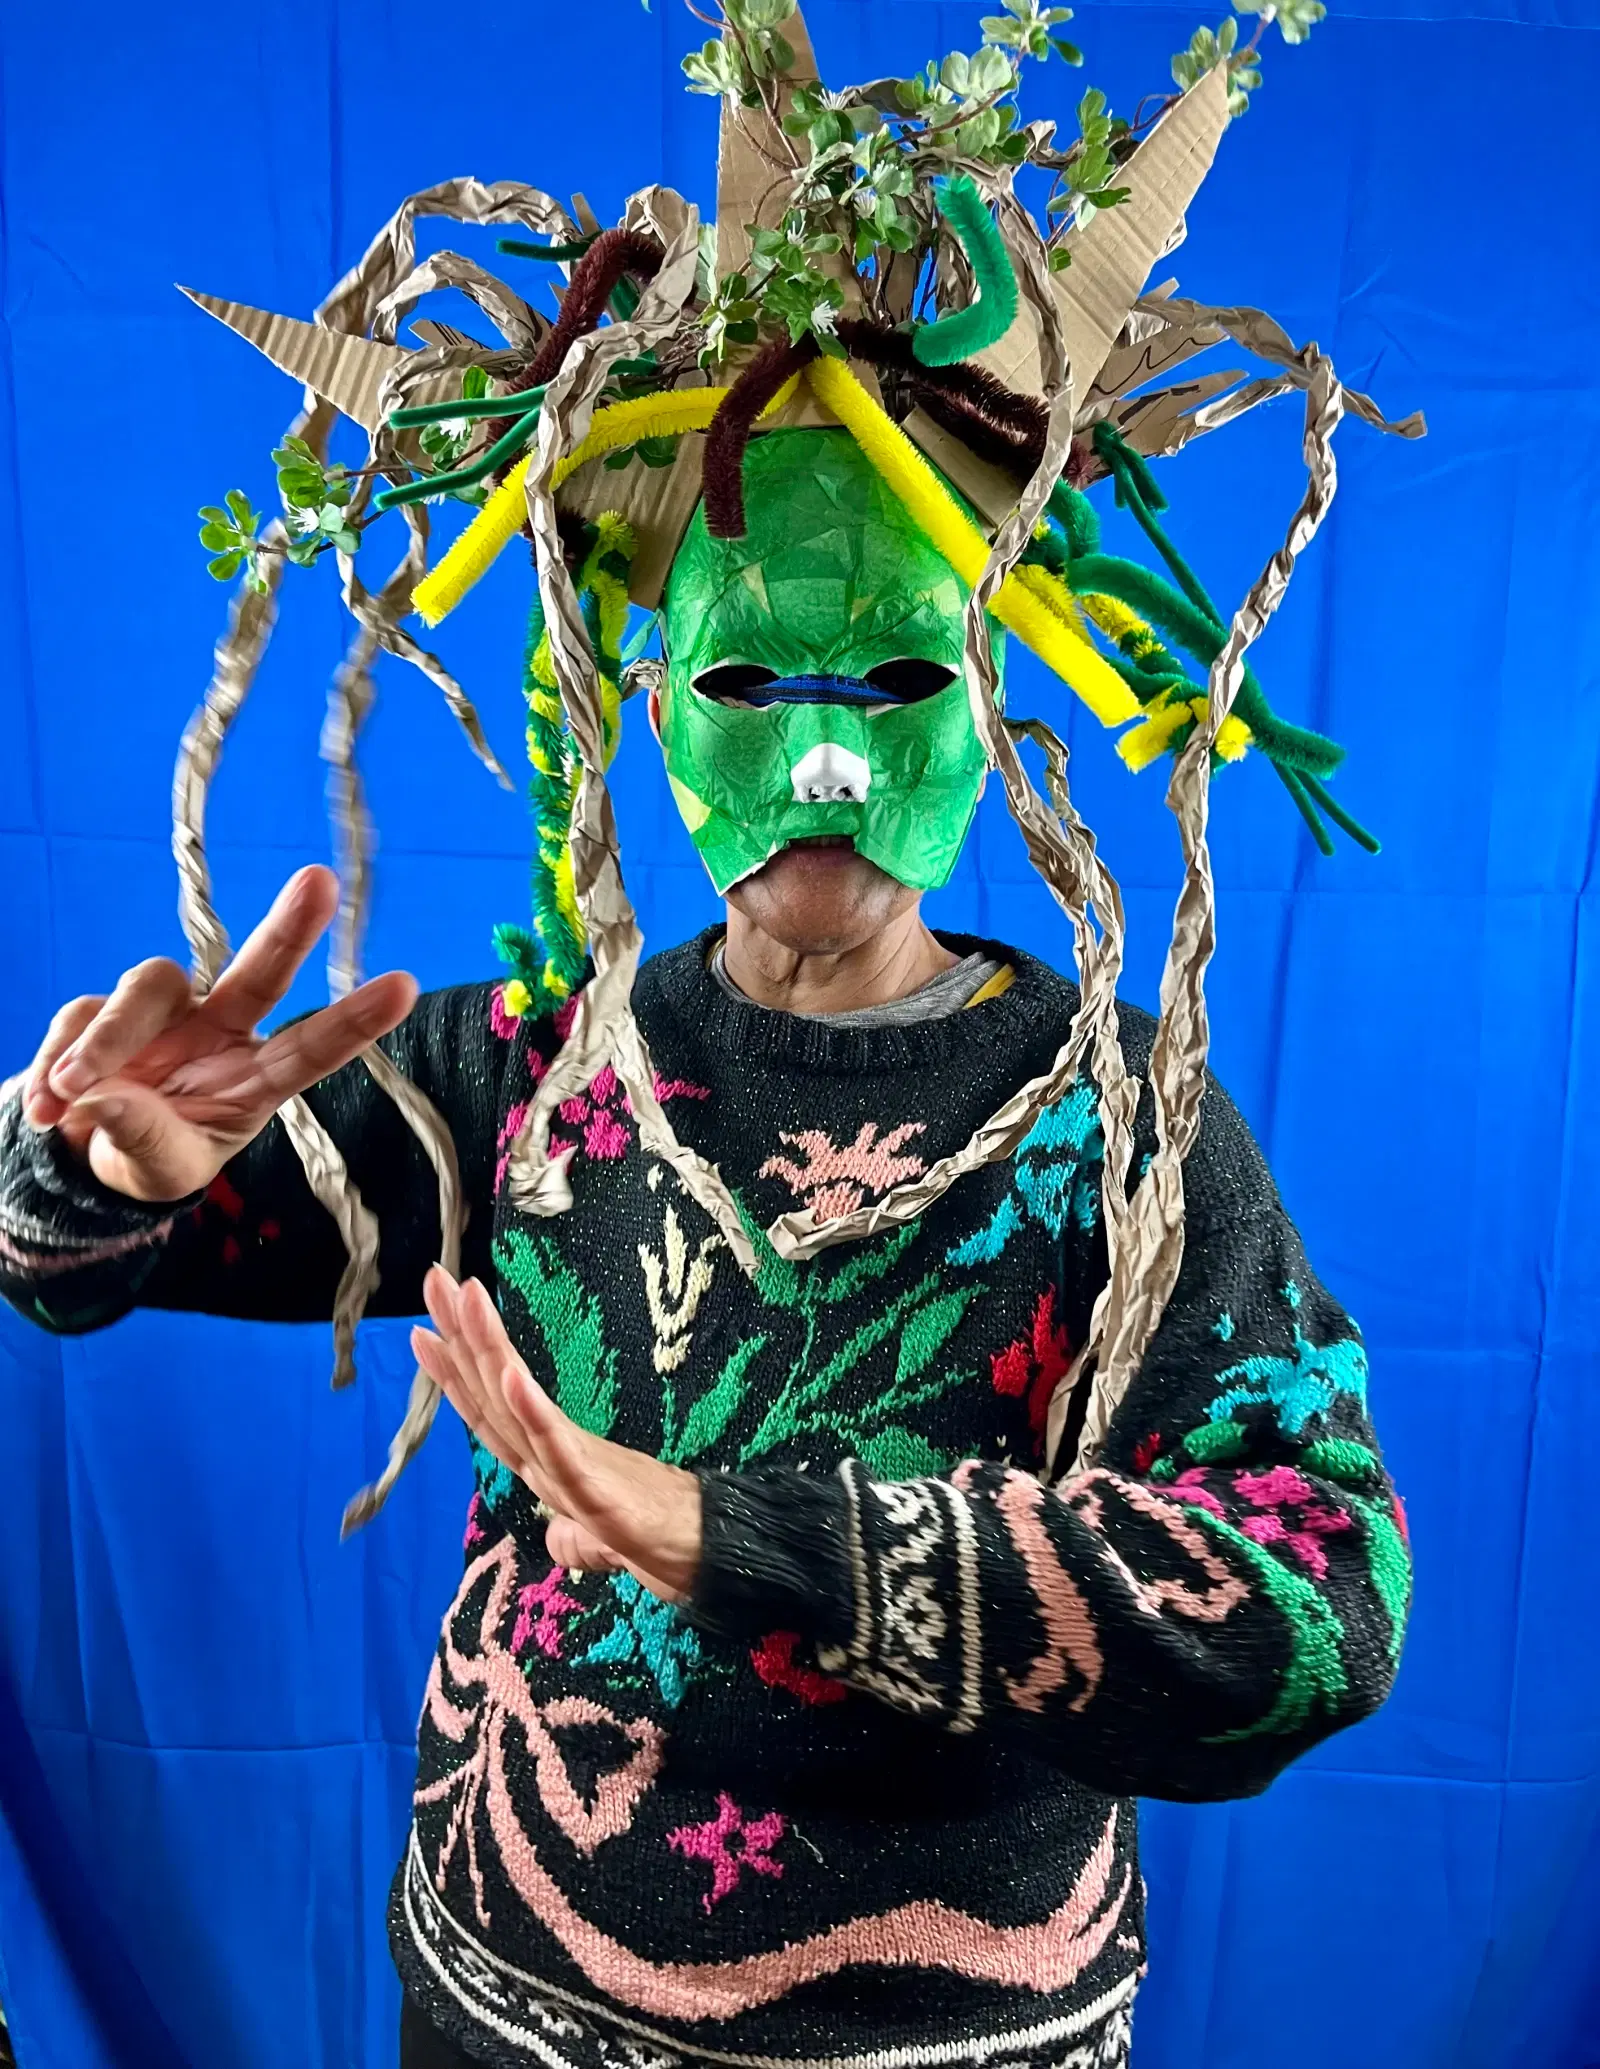 A person in a creative and colorful handmade mask with twisted paper elements and vibrant green tones, posing energetically against a blue backdrop.